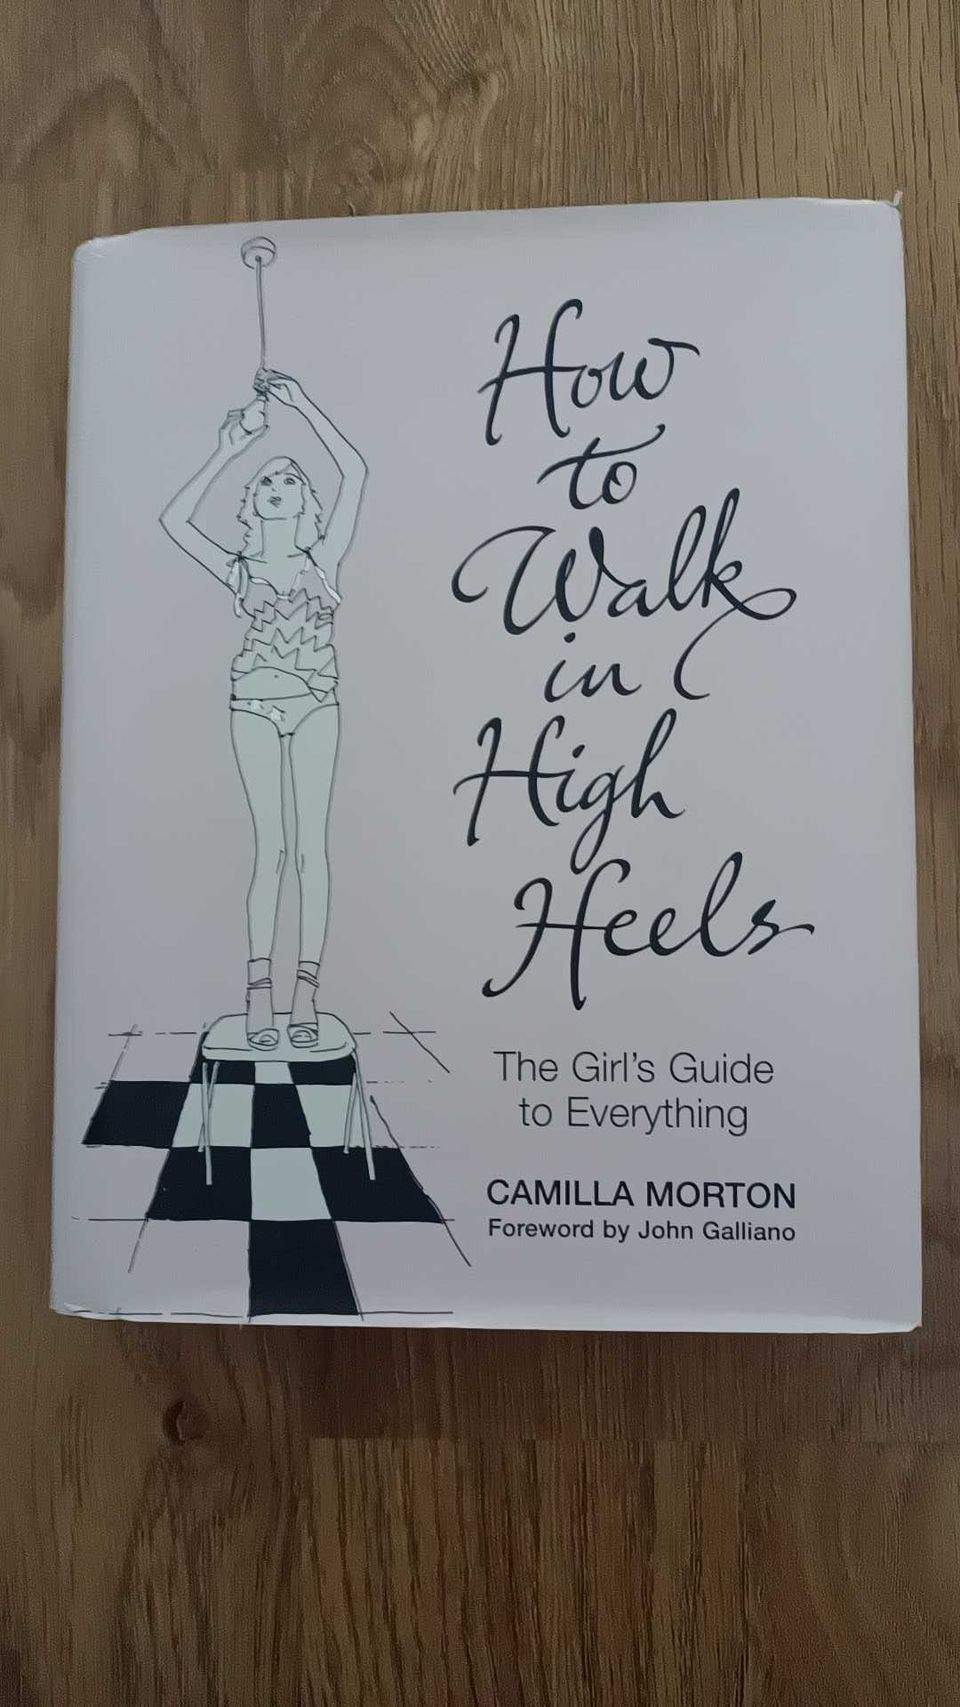 CAMILLA MORTON : HOW TO WALK IN HIGH HEELS : THE GIRL'S GUIDE TO EVERYTHING